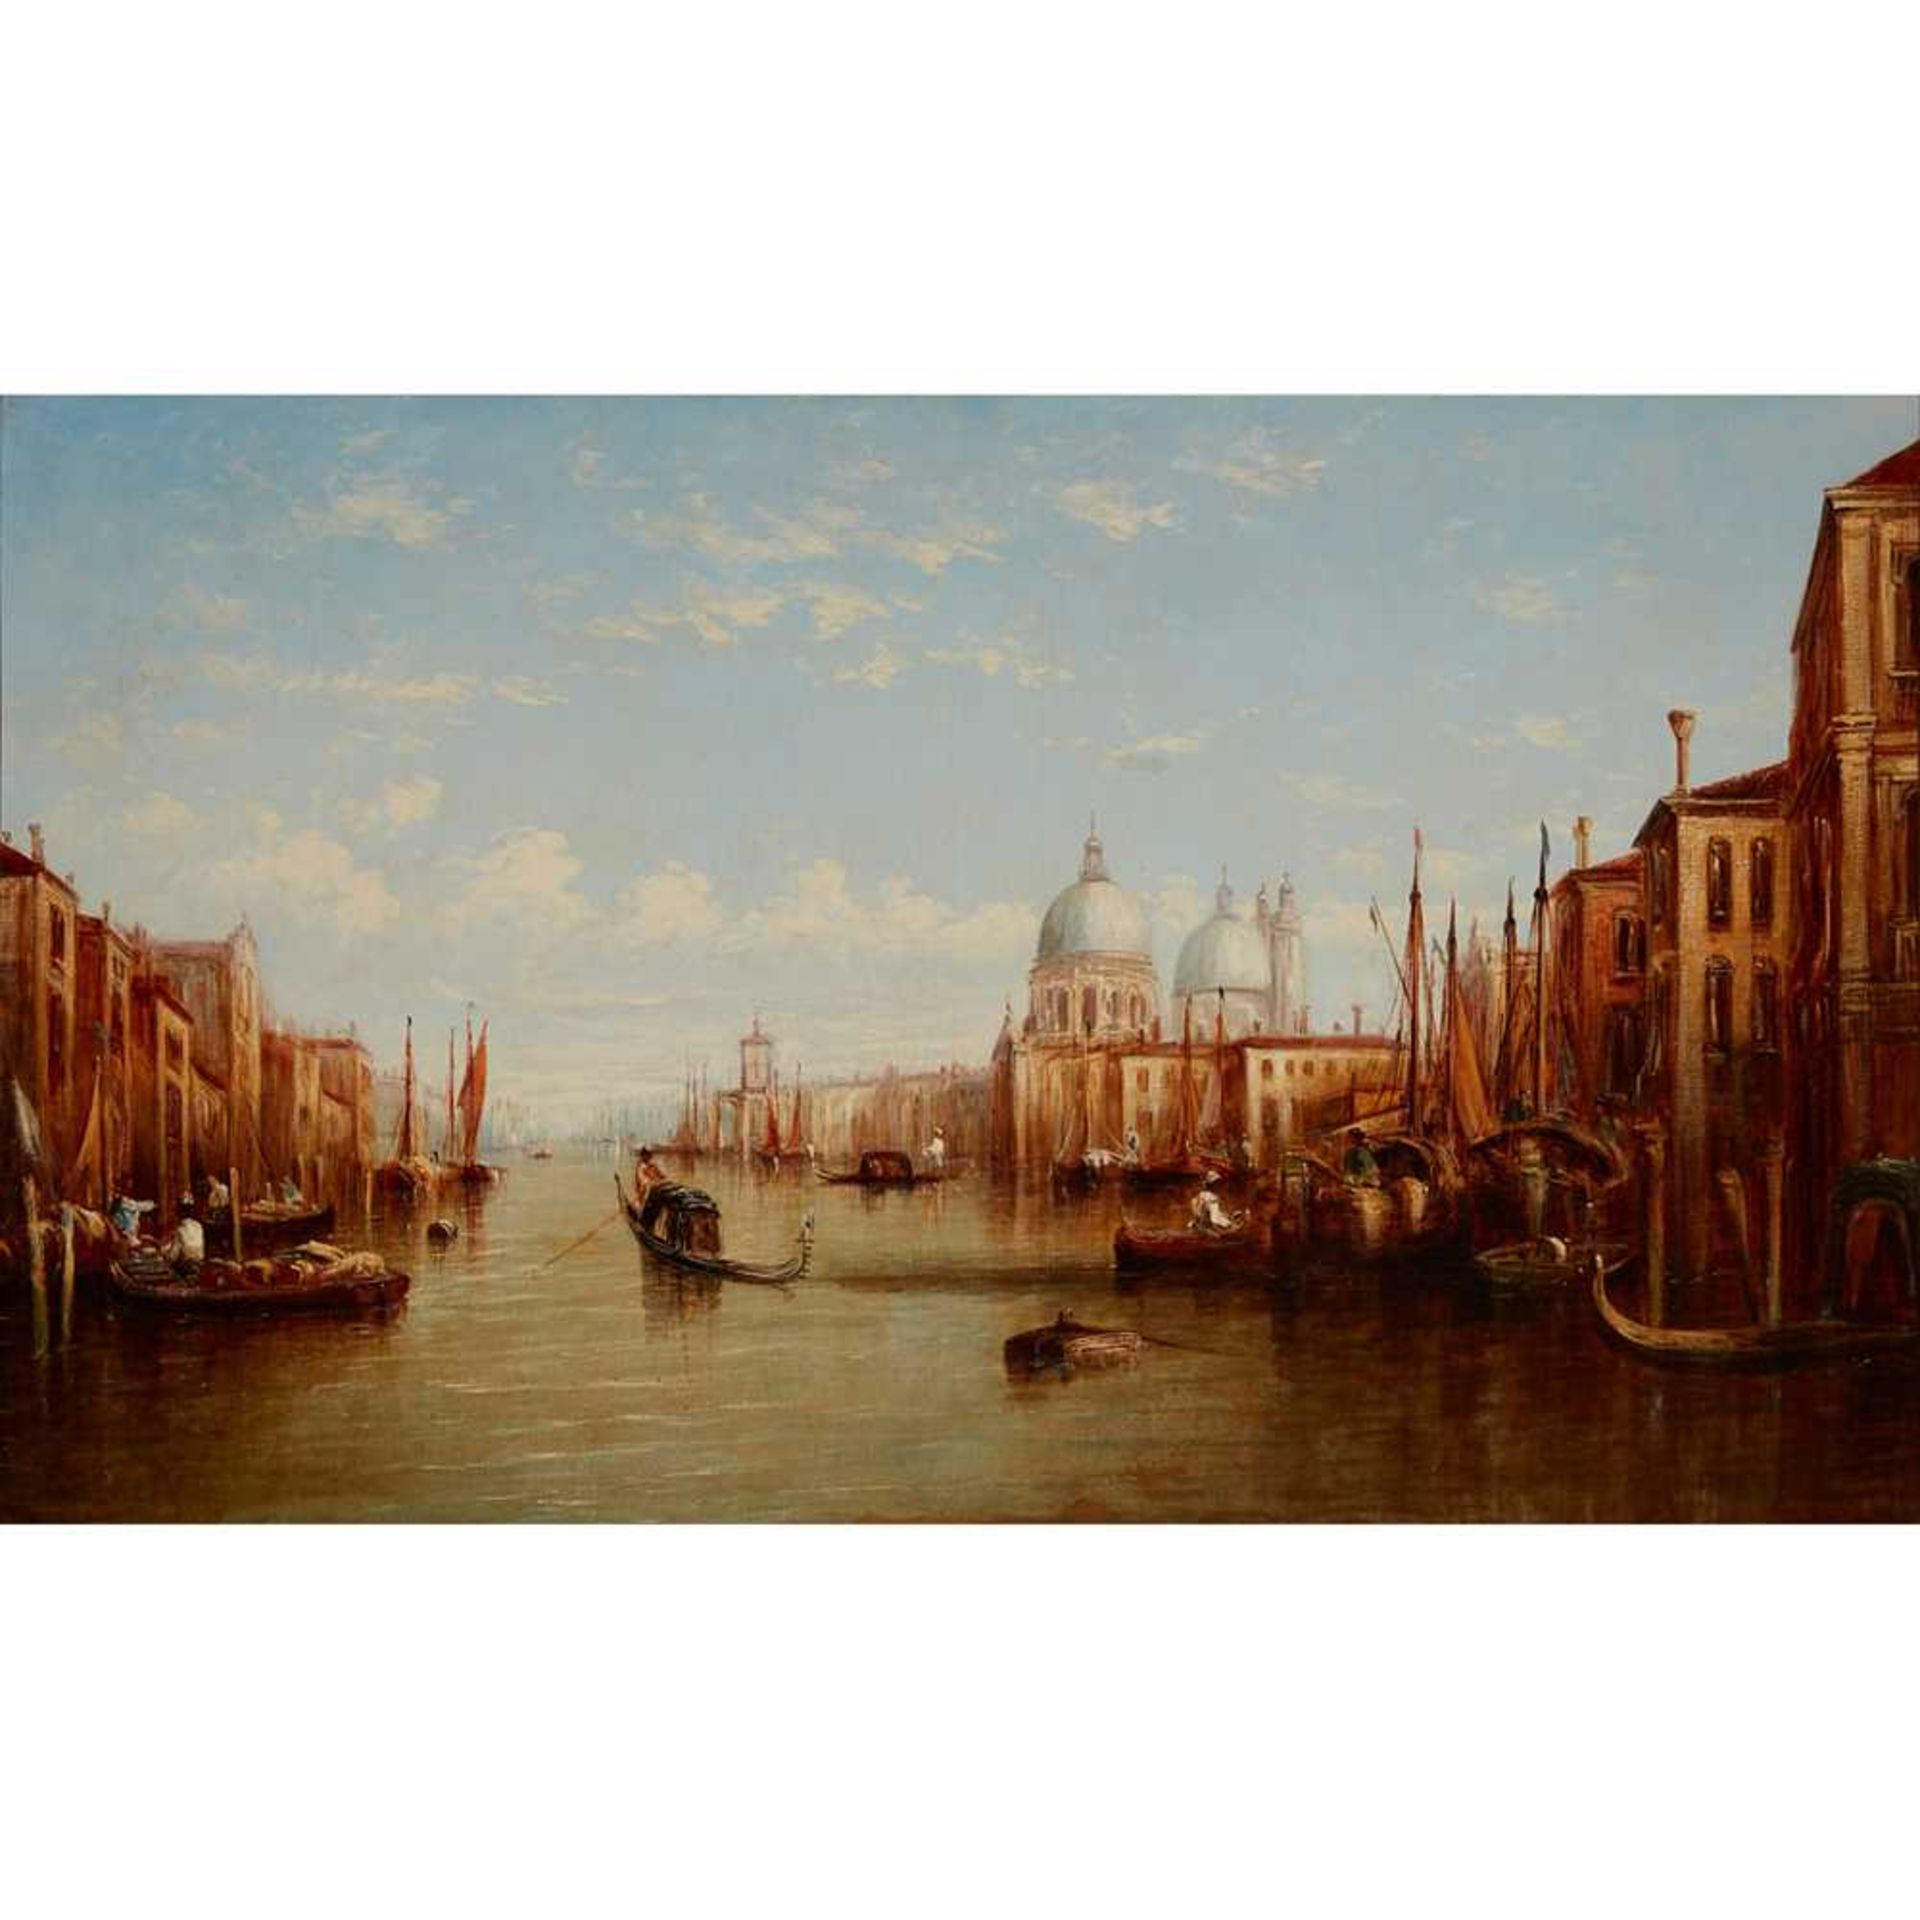 FRANCIS MALTINO (BRITISH 1818-1874) ON THE GRAND CANAL, VENICE - Image 2 of 3